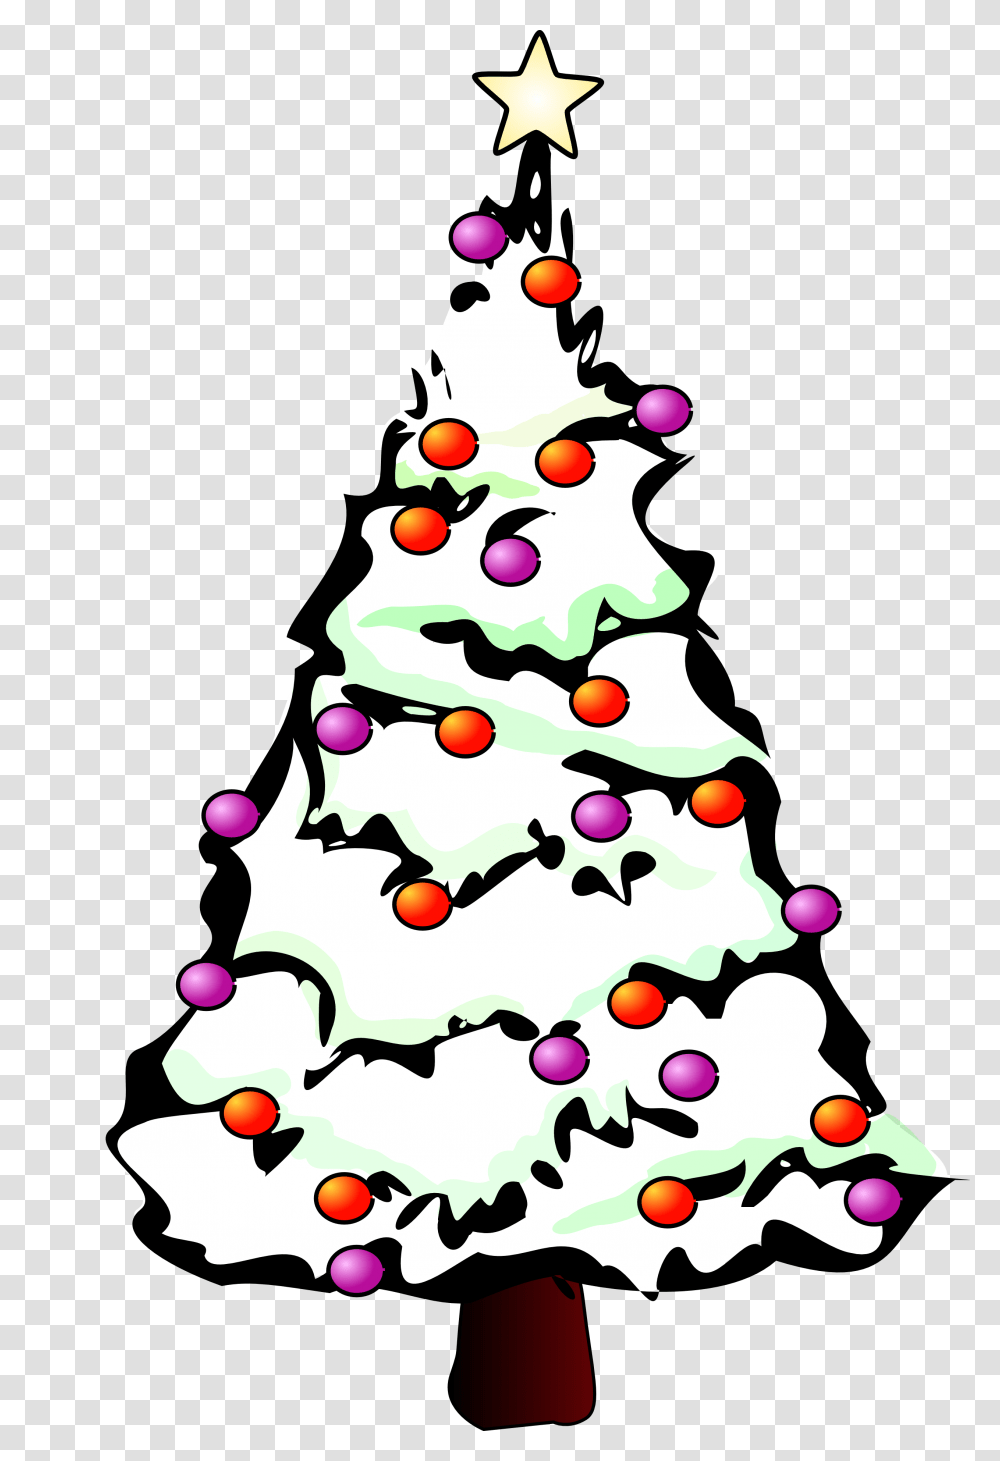 Christmas Tree Black And White Clipart Christmas Tree Clip Art, Plant, Ornament, Star Symbol Transparent Png